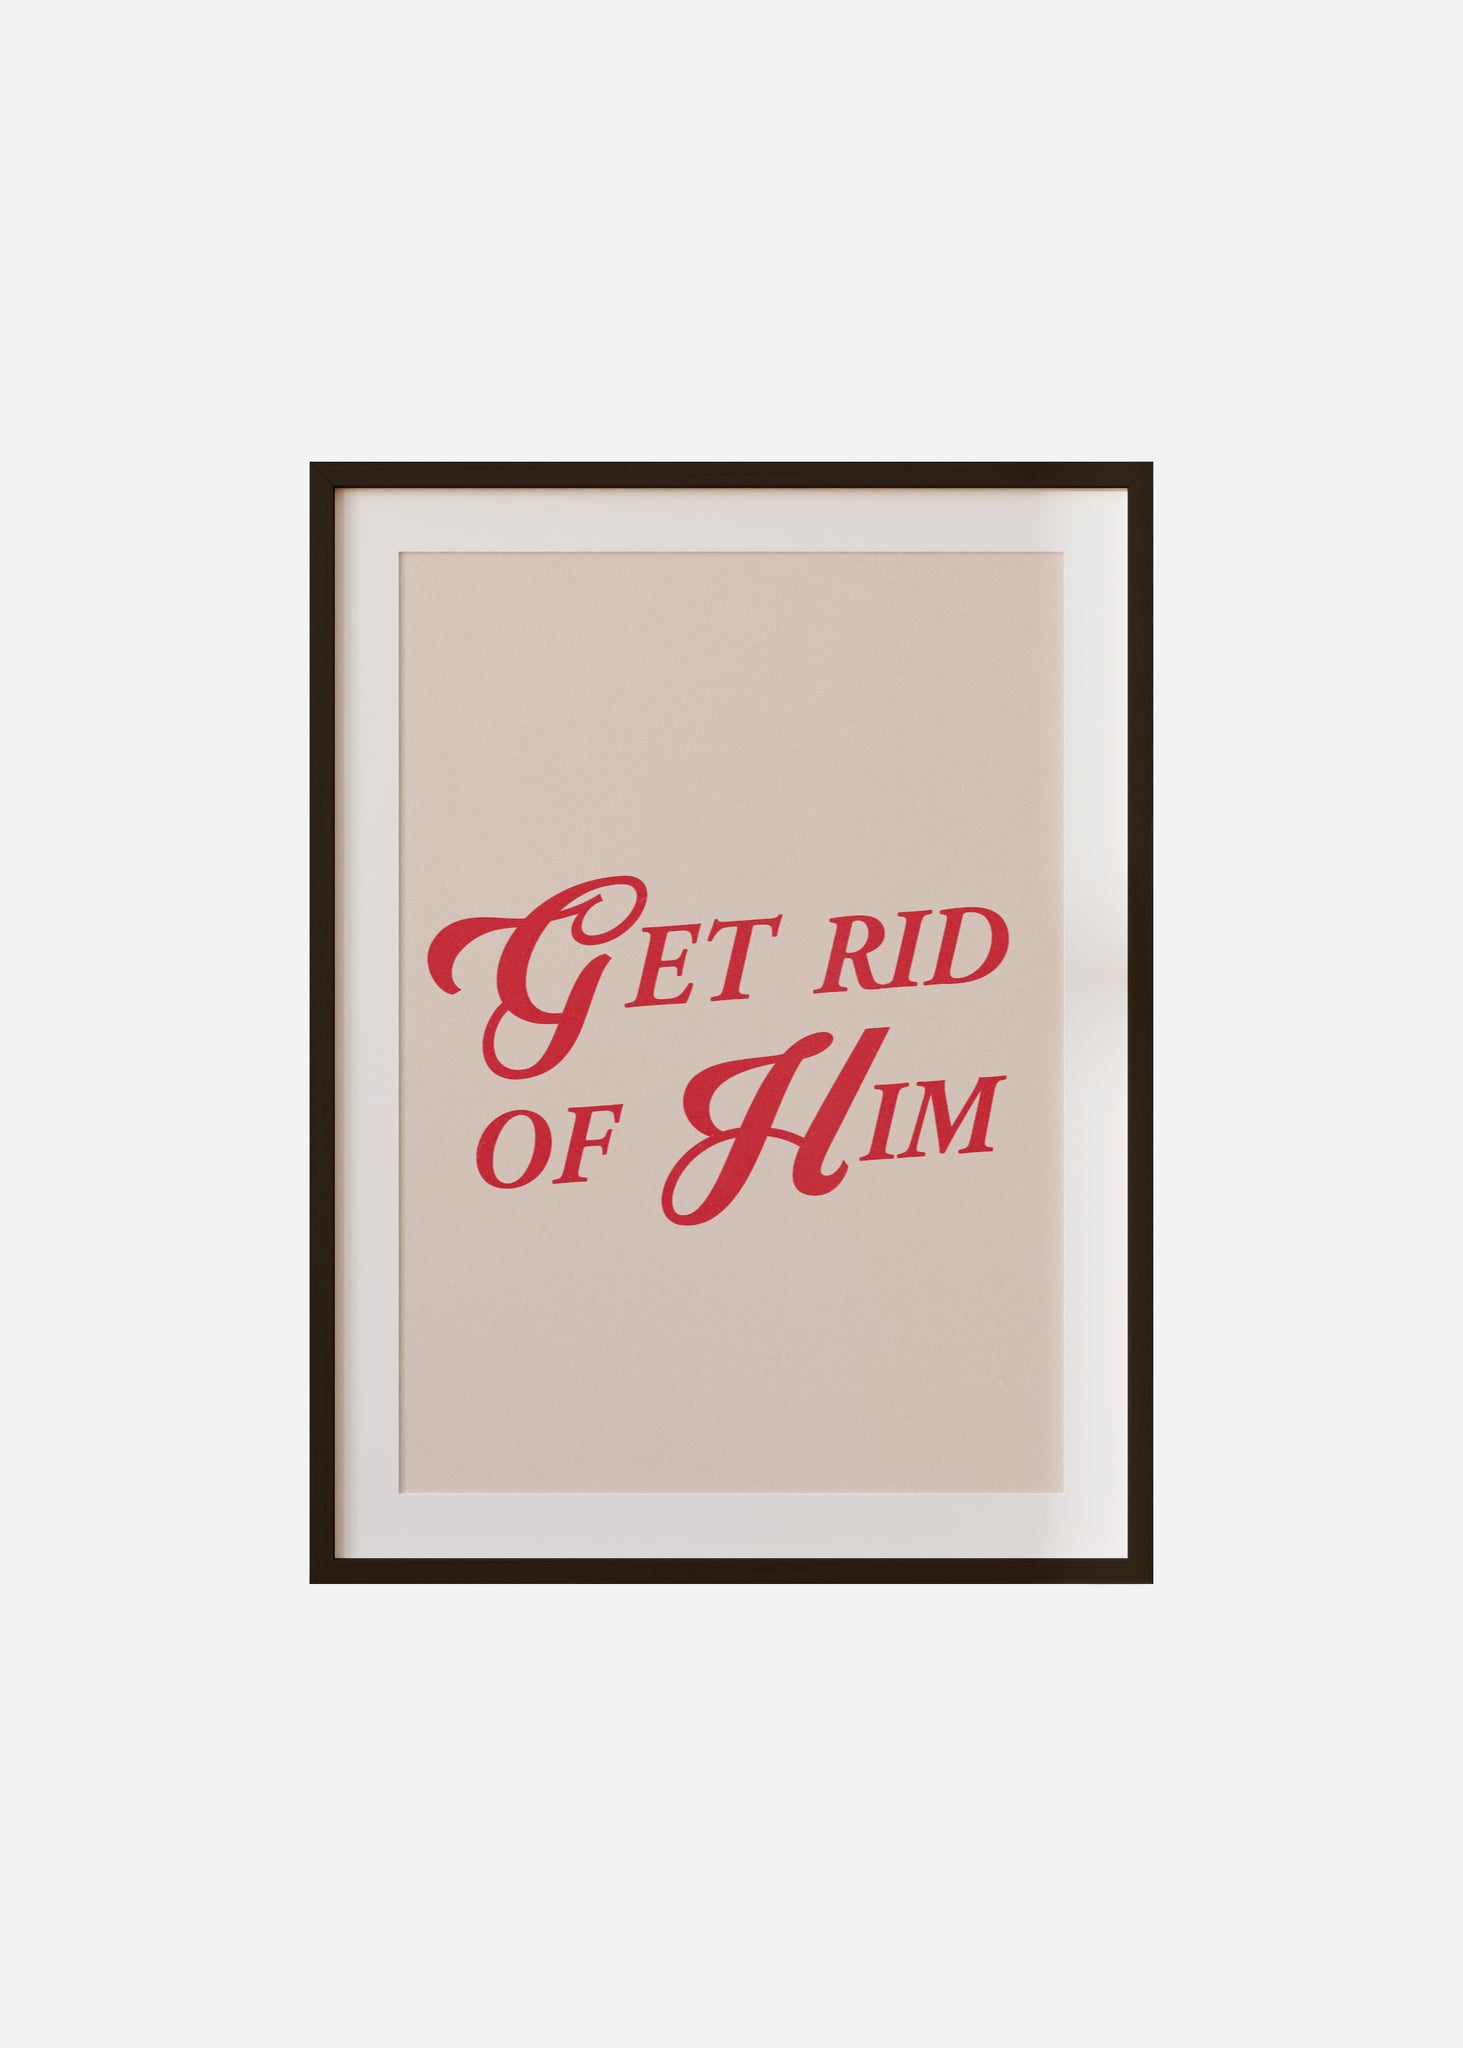 get rid of him Framed & Mounted Print